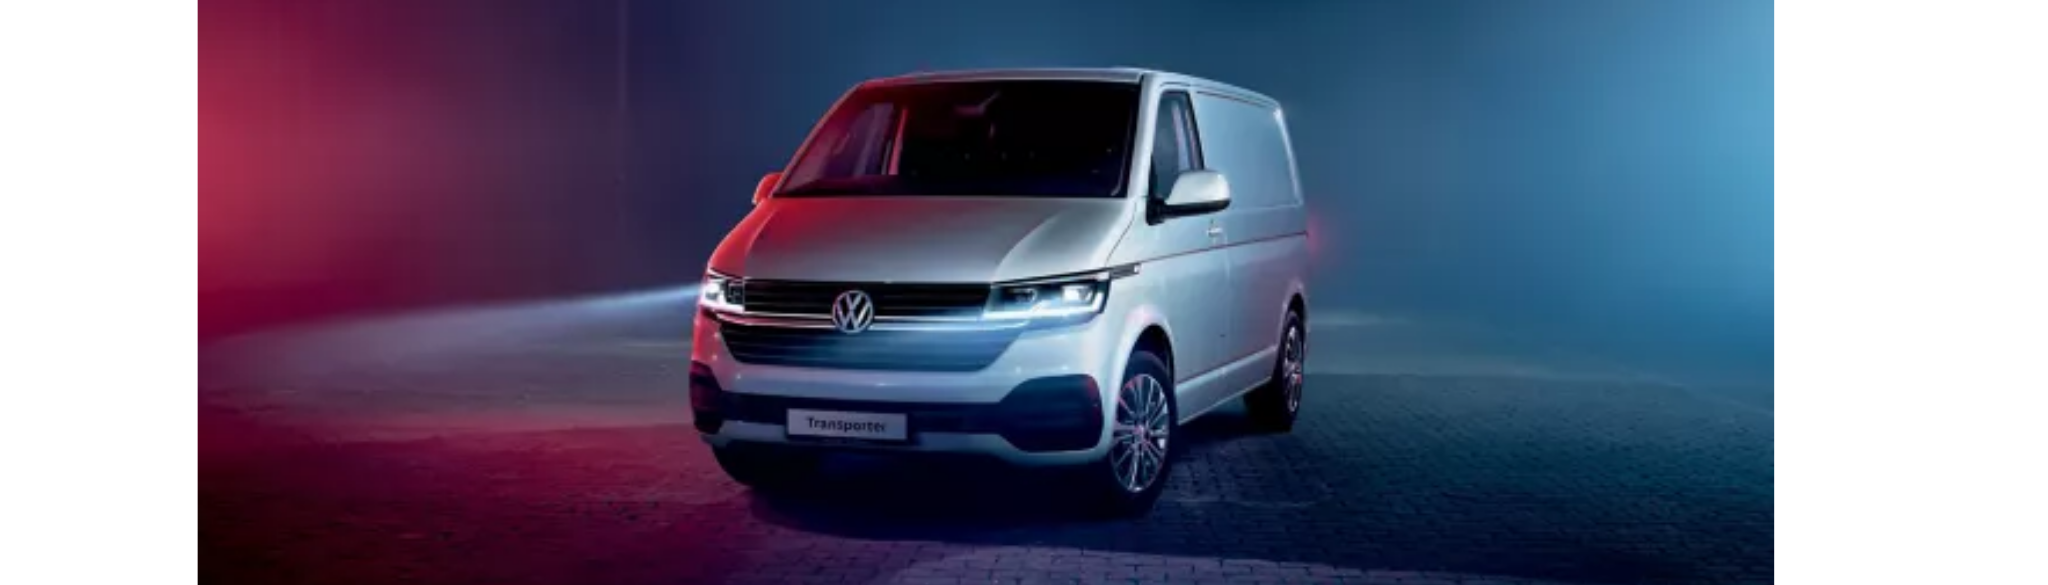 White Volkswagen Transporter parked with lights on